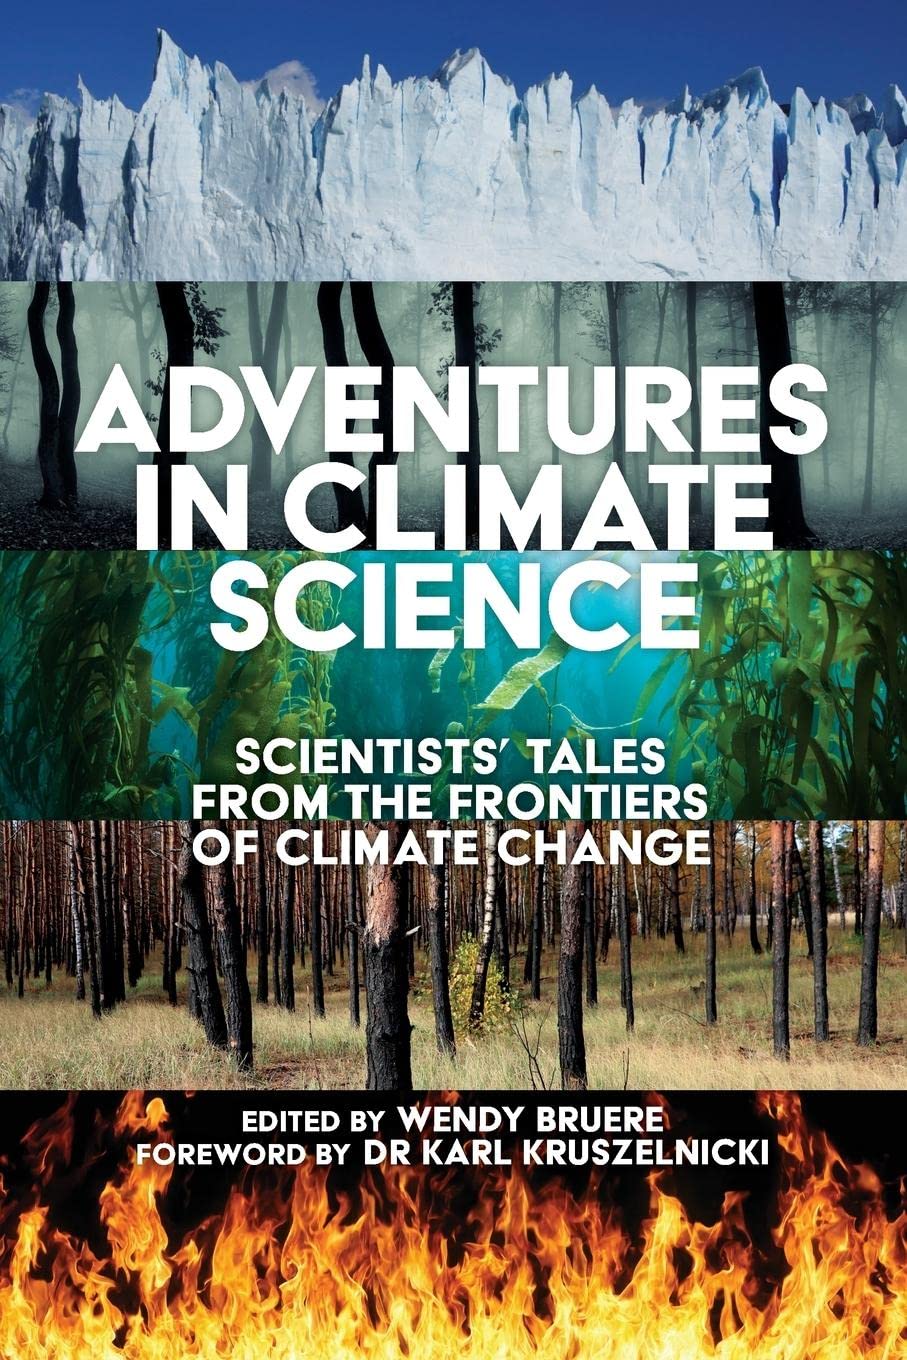 Adventures in Climate Science: Scientists' Tales from the Frontiers of Climate Change